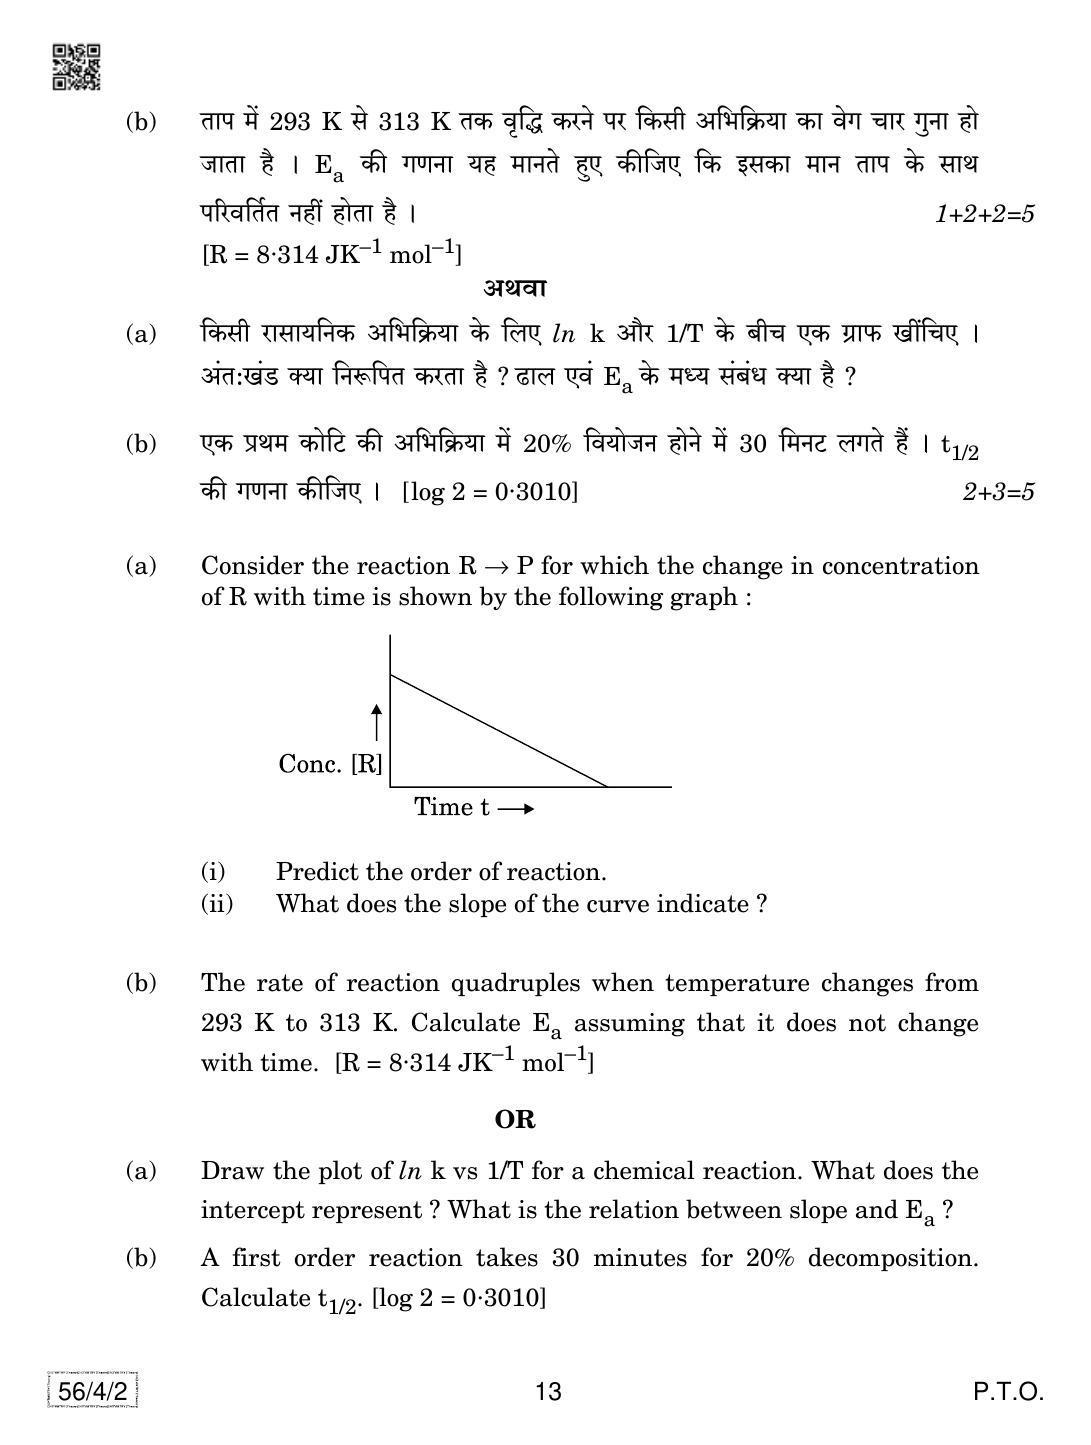 CBSE Class 12 56-4-2 Chemistry 2019 Question Paper - Page 13